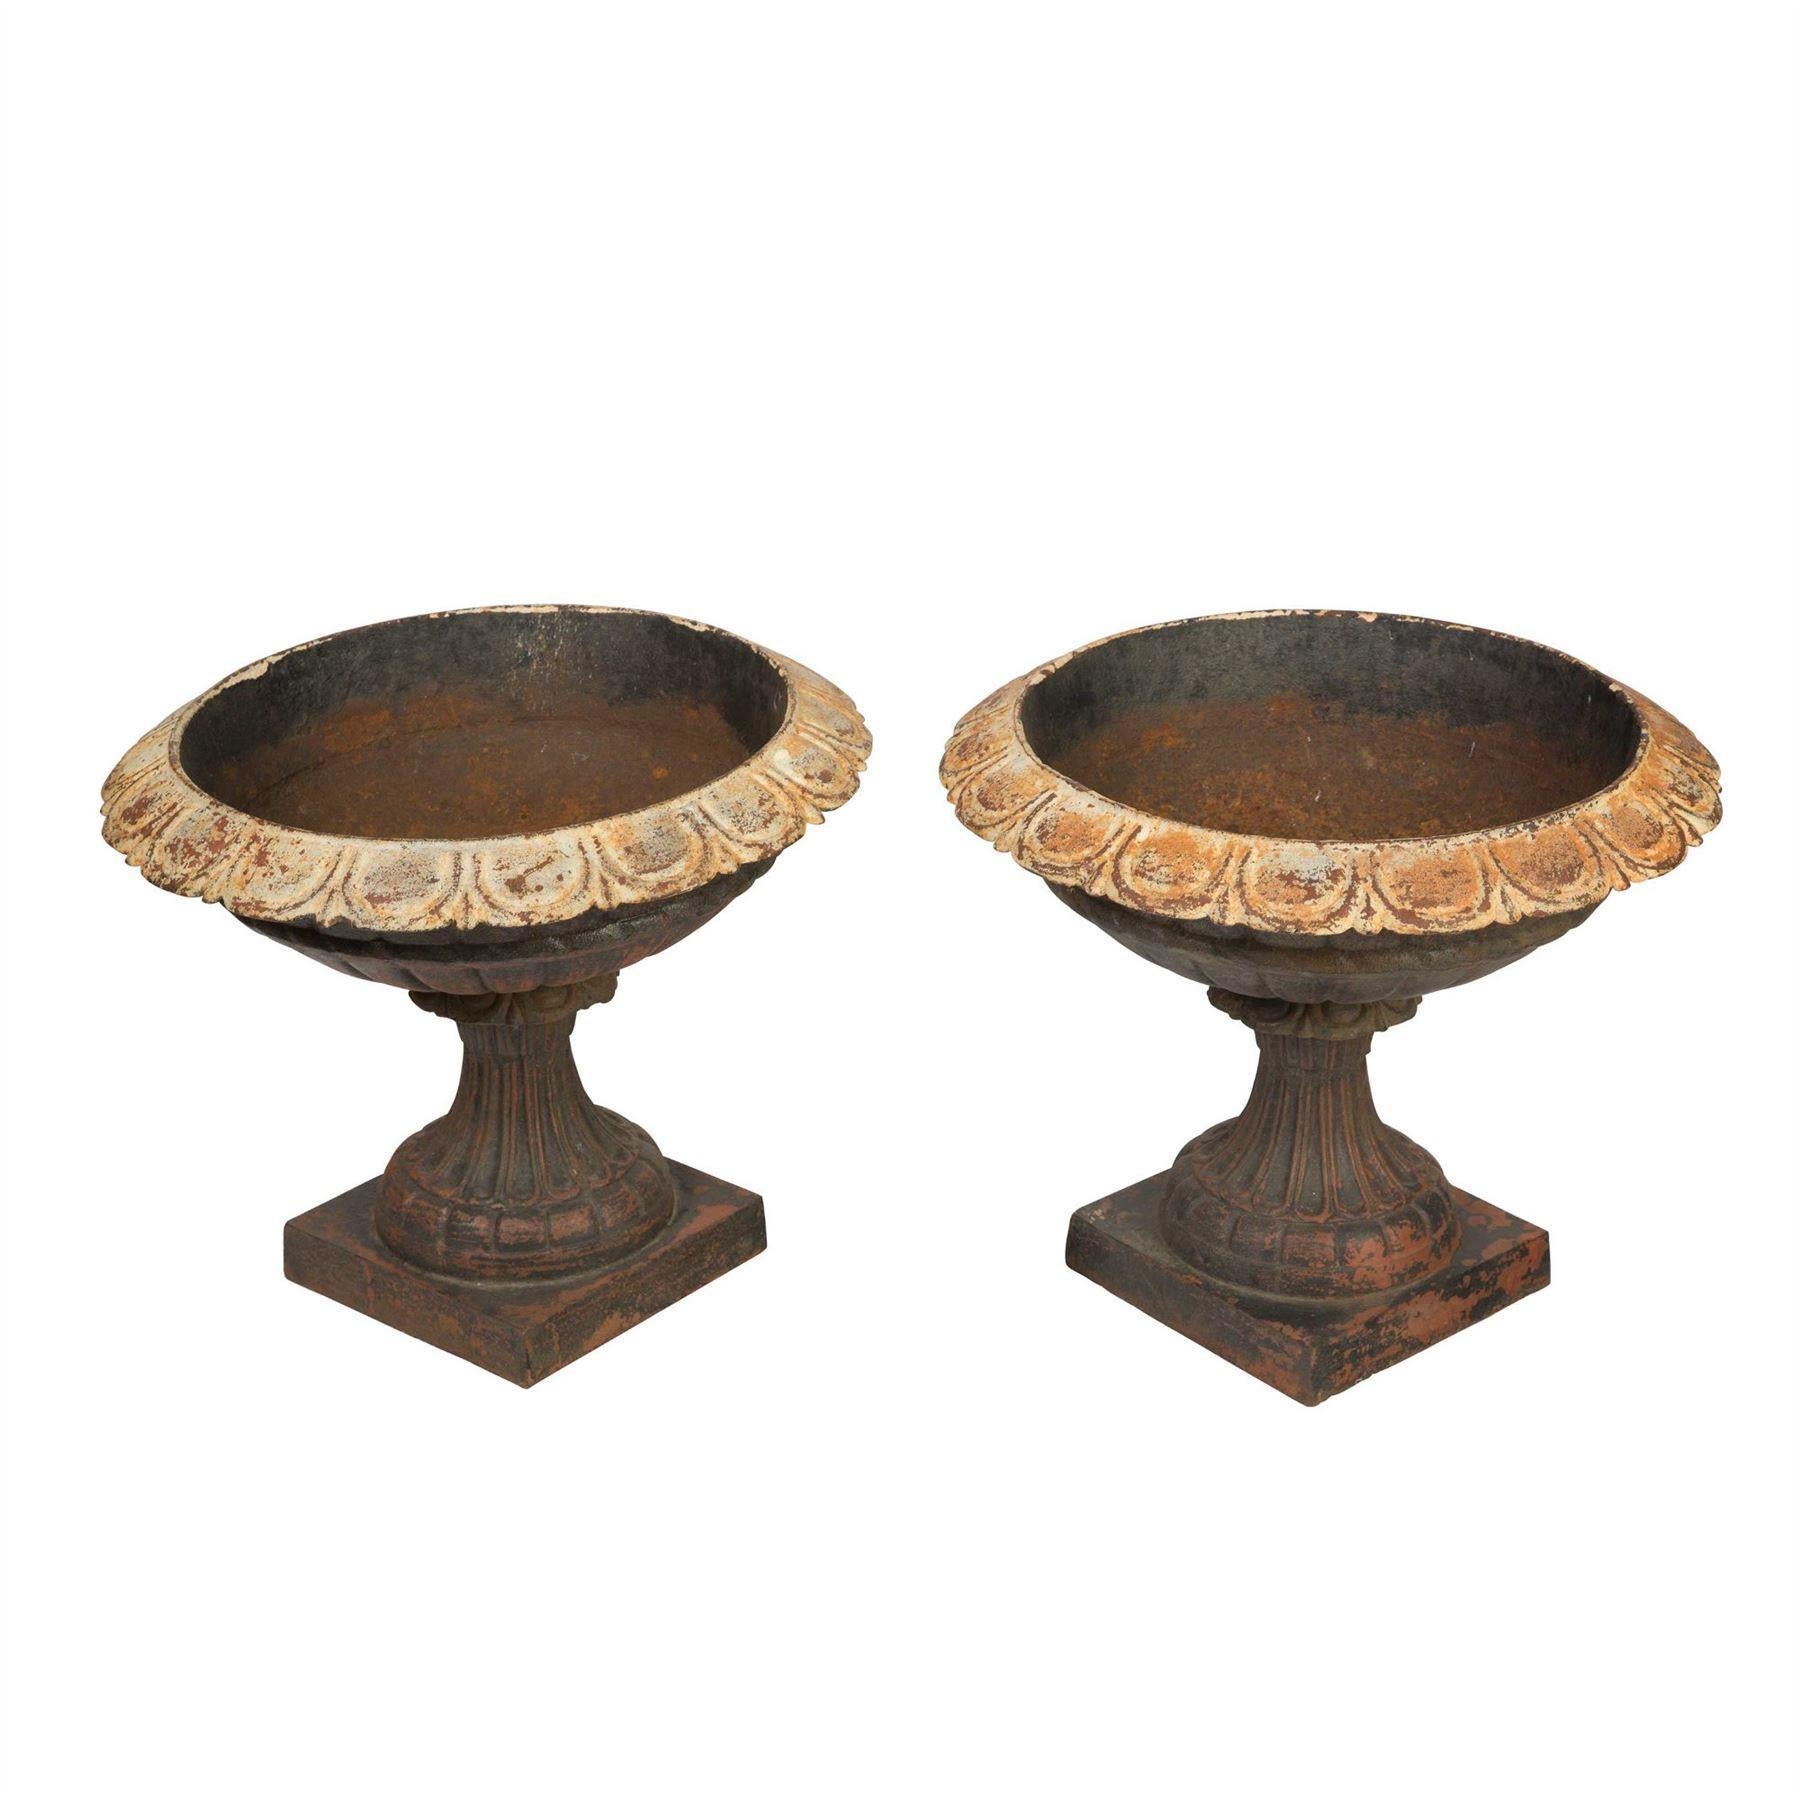 Pair of 19th century French cast iron urns.
 